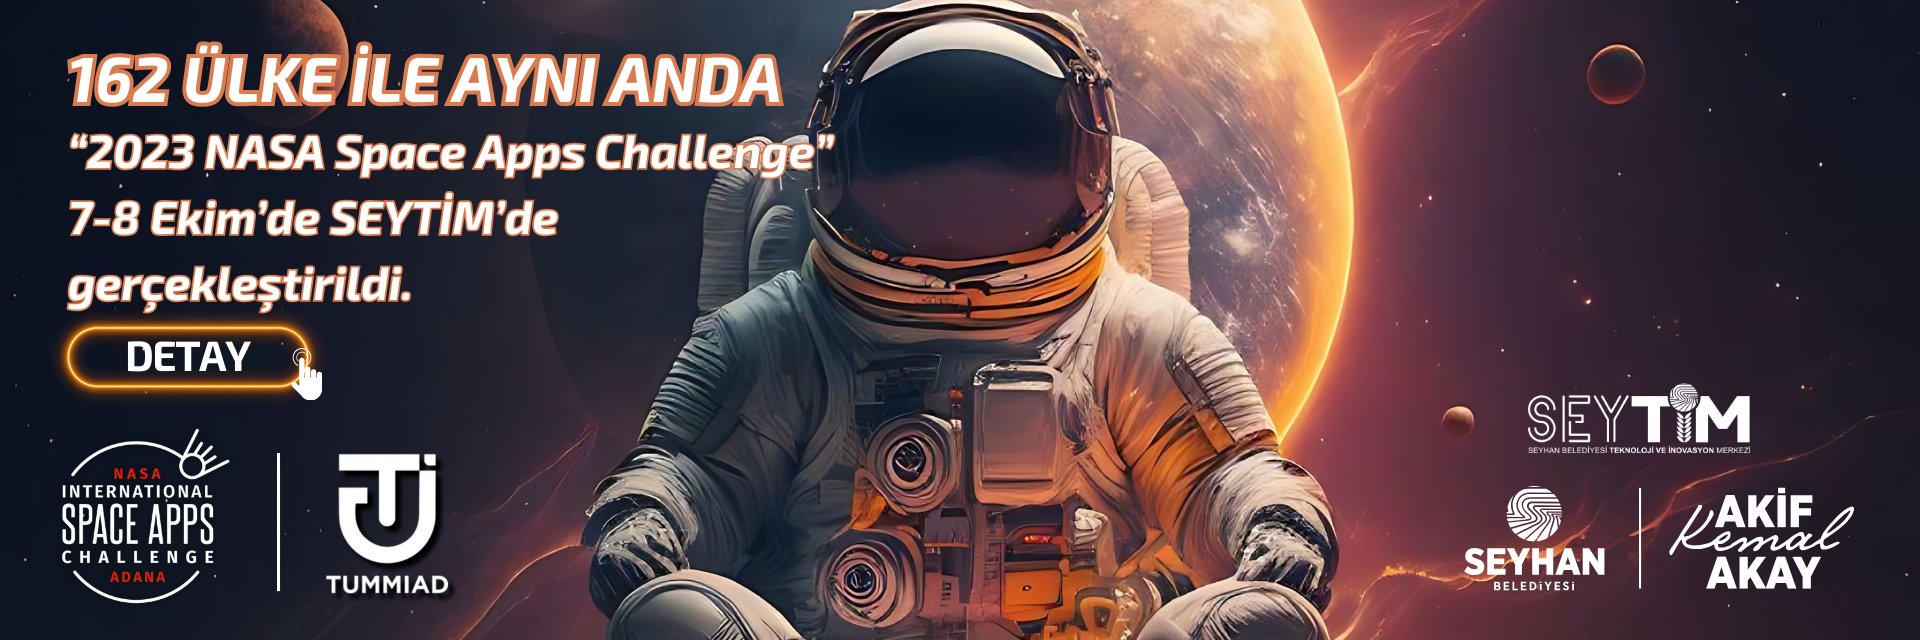 NASA SPACE APPS CHALLANGE